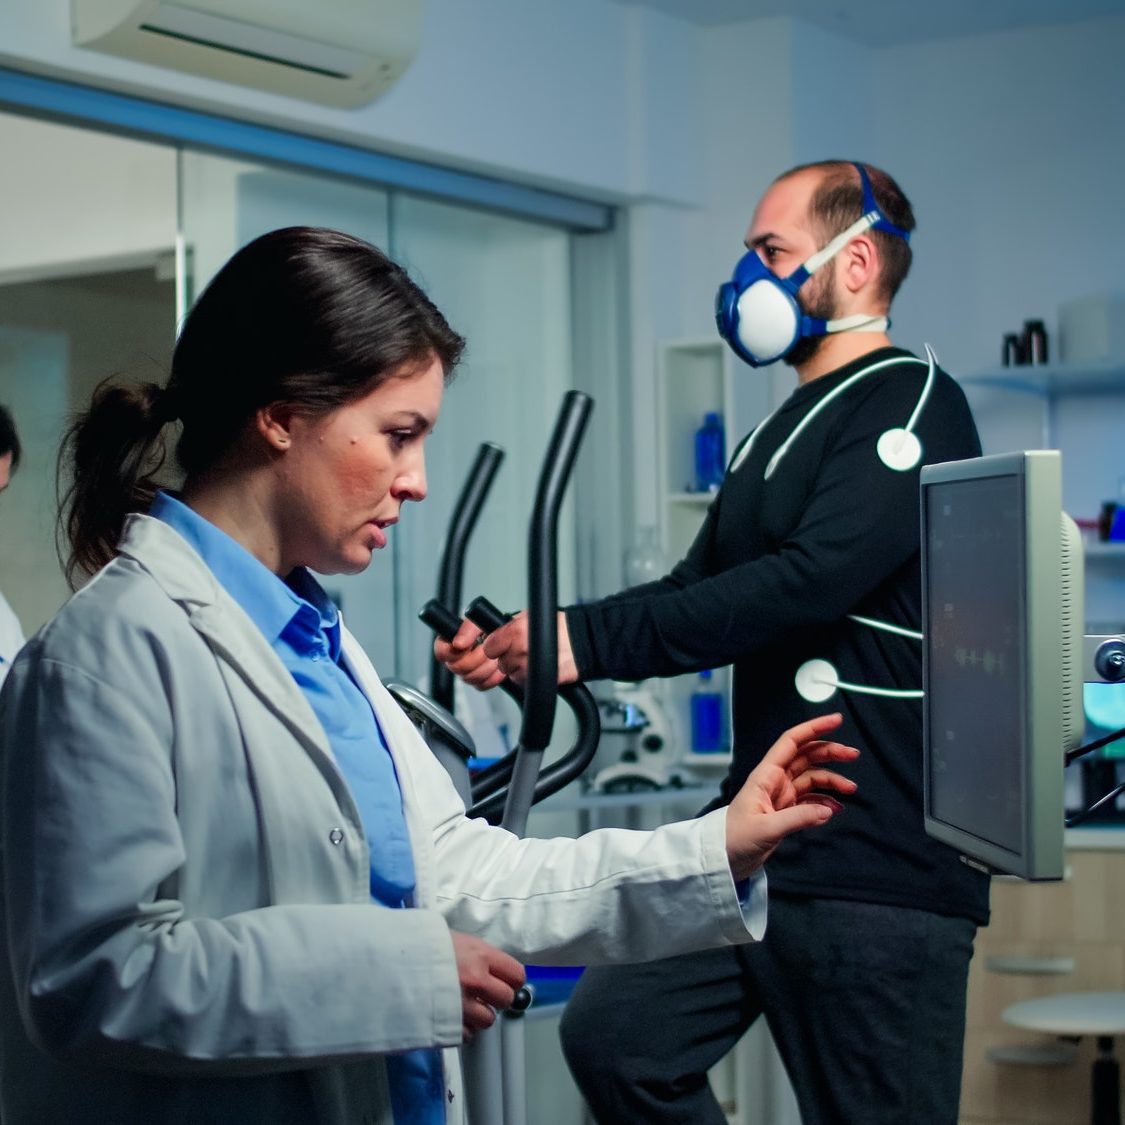 Doctor sport scientist checking EKG scan at monitor while man with mask running